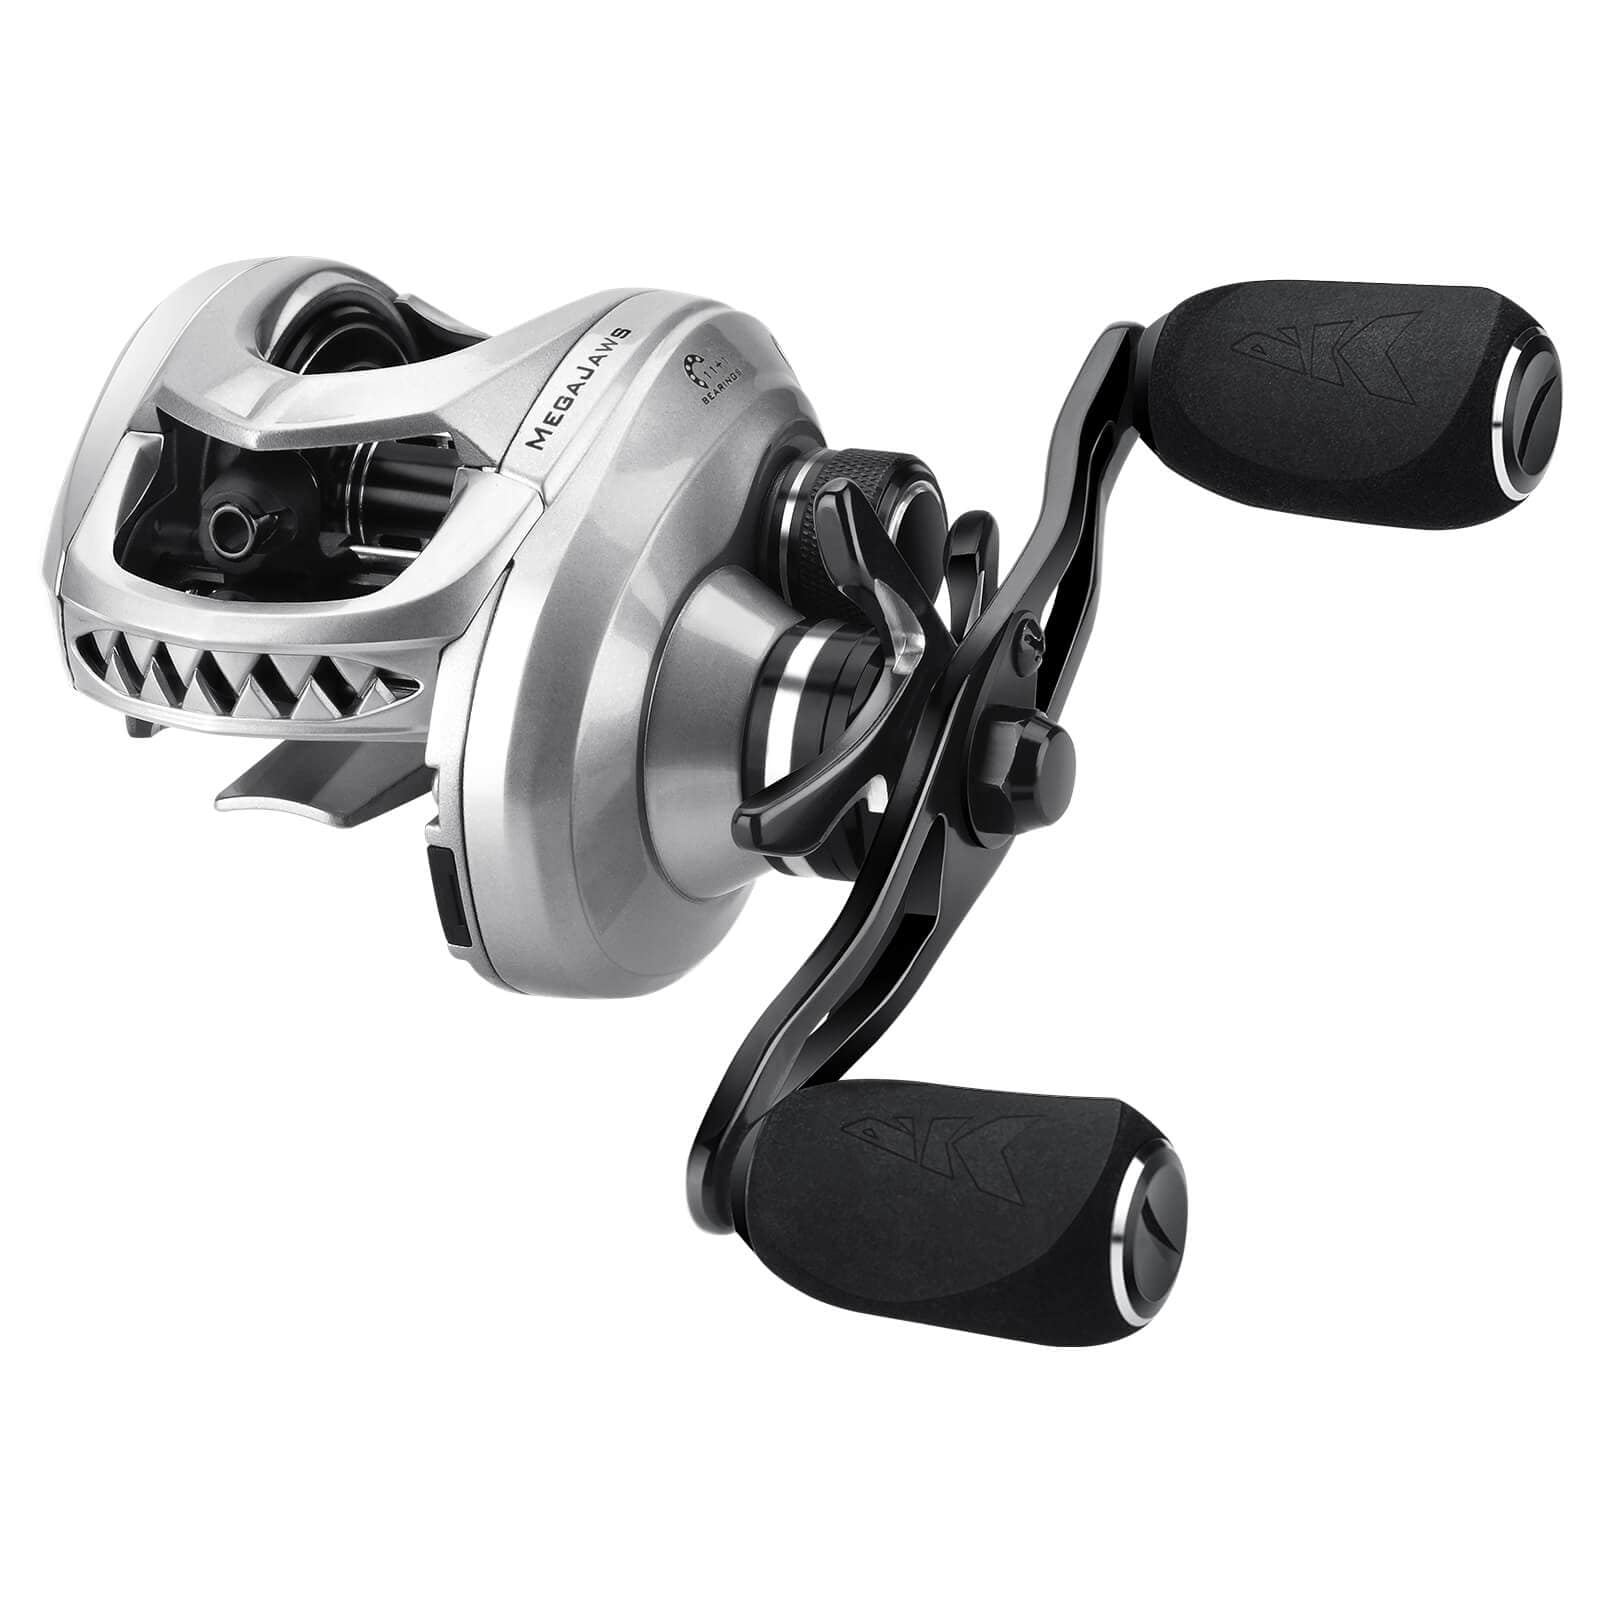 Series Baitcasting Reel Centrifugal Brake System Fishing 240127 From  Chao07, $47.65